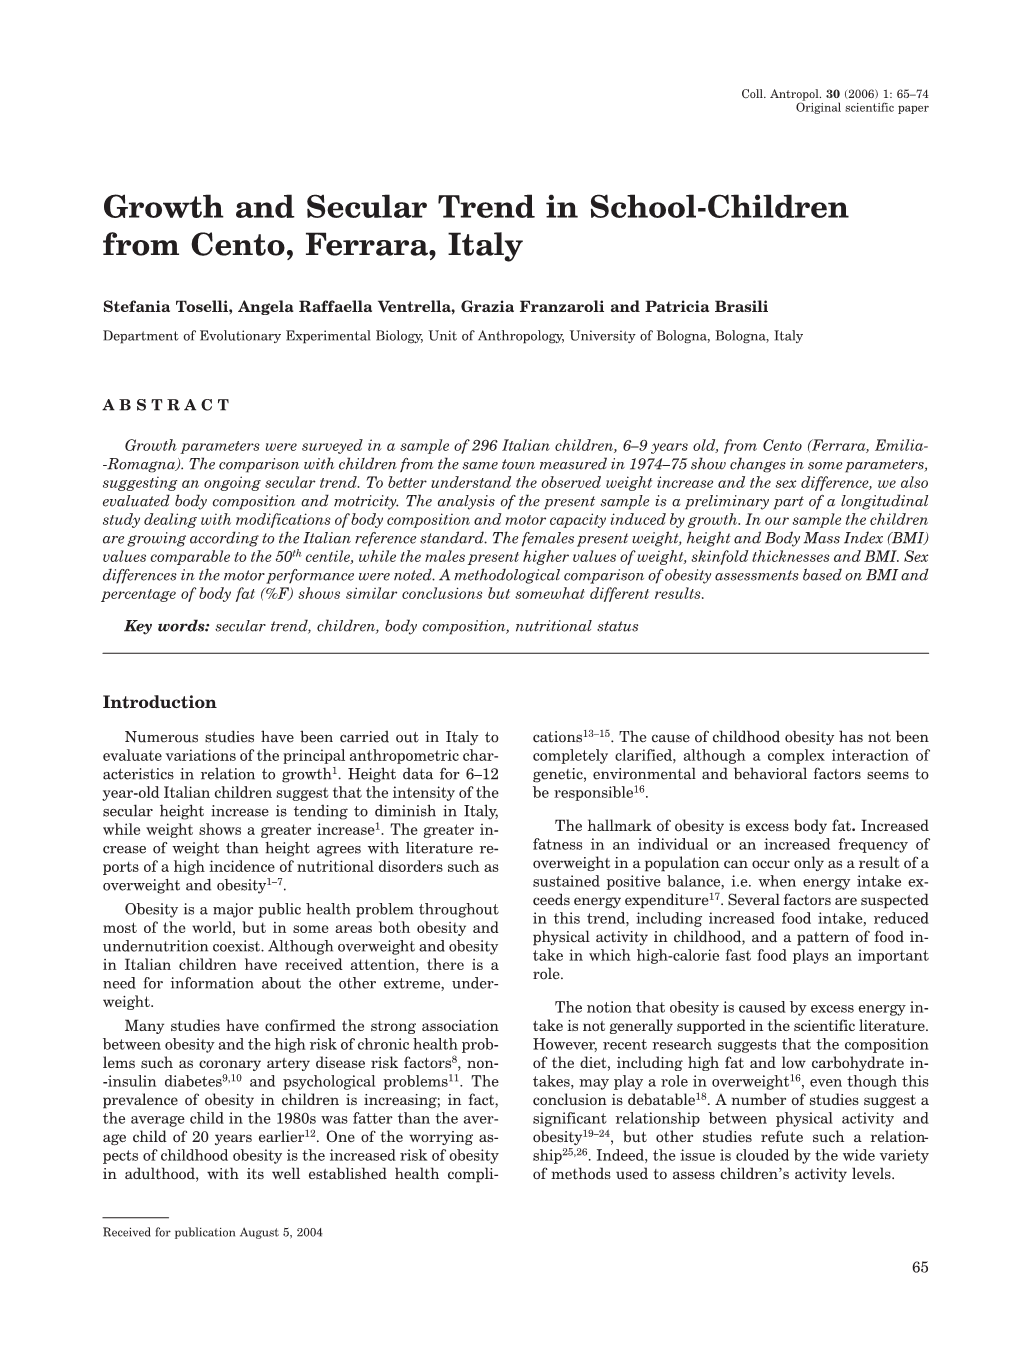 Growth and Secular Trend in School-Children from Cento, Ferrara, Italy